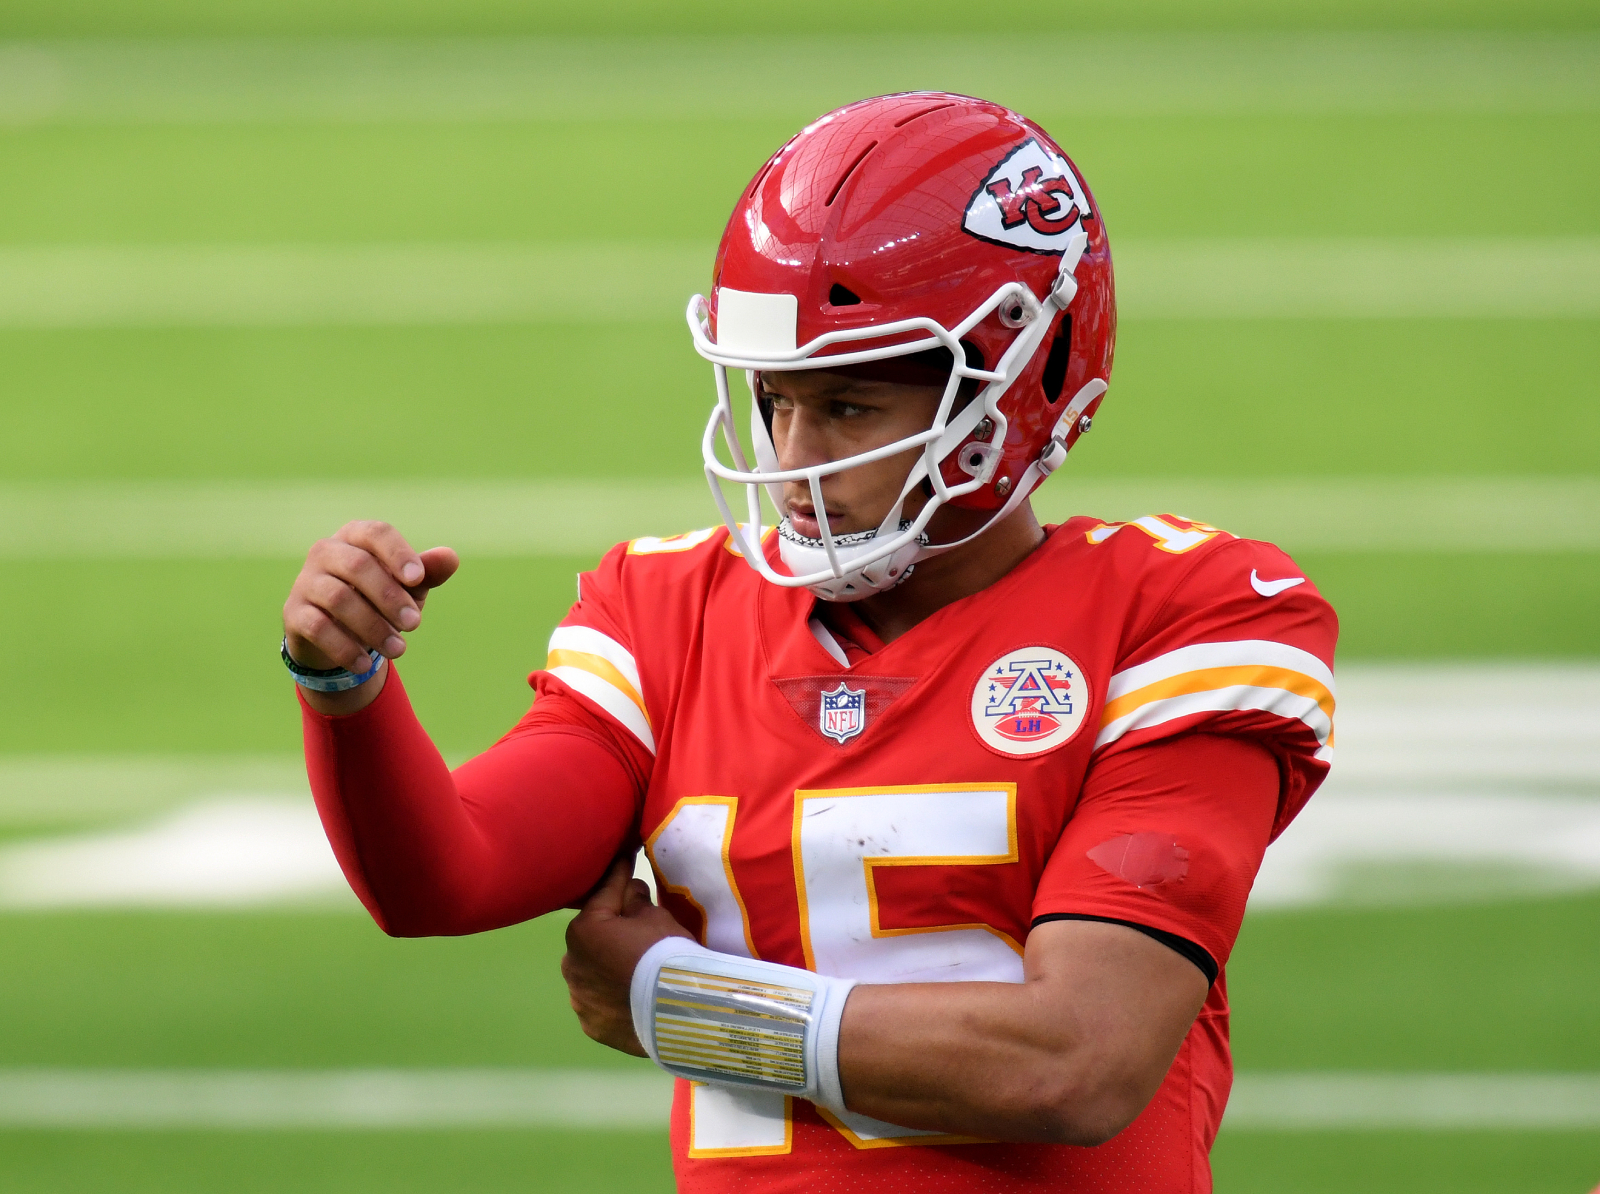 Patrick Mahomes has become one of the best QBs in the NFL for the Kansas City Chiefs. An NFL coach, though, thinks that he is underpaid.